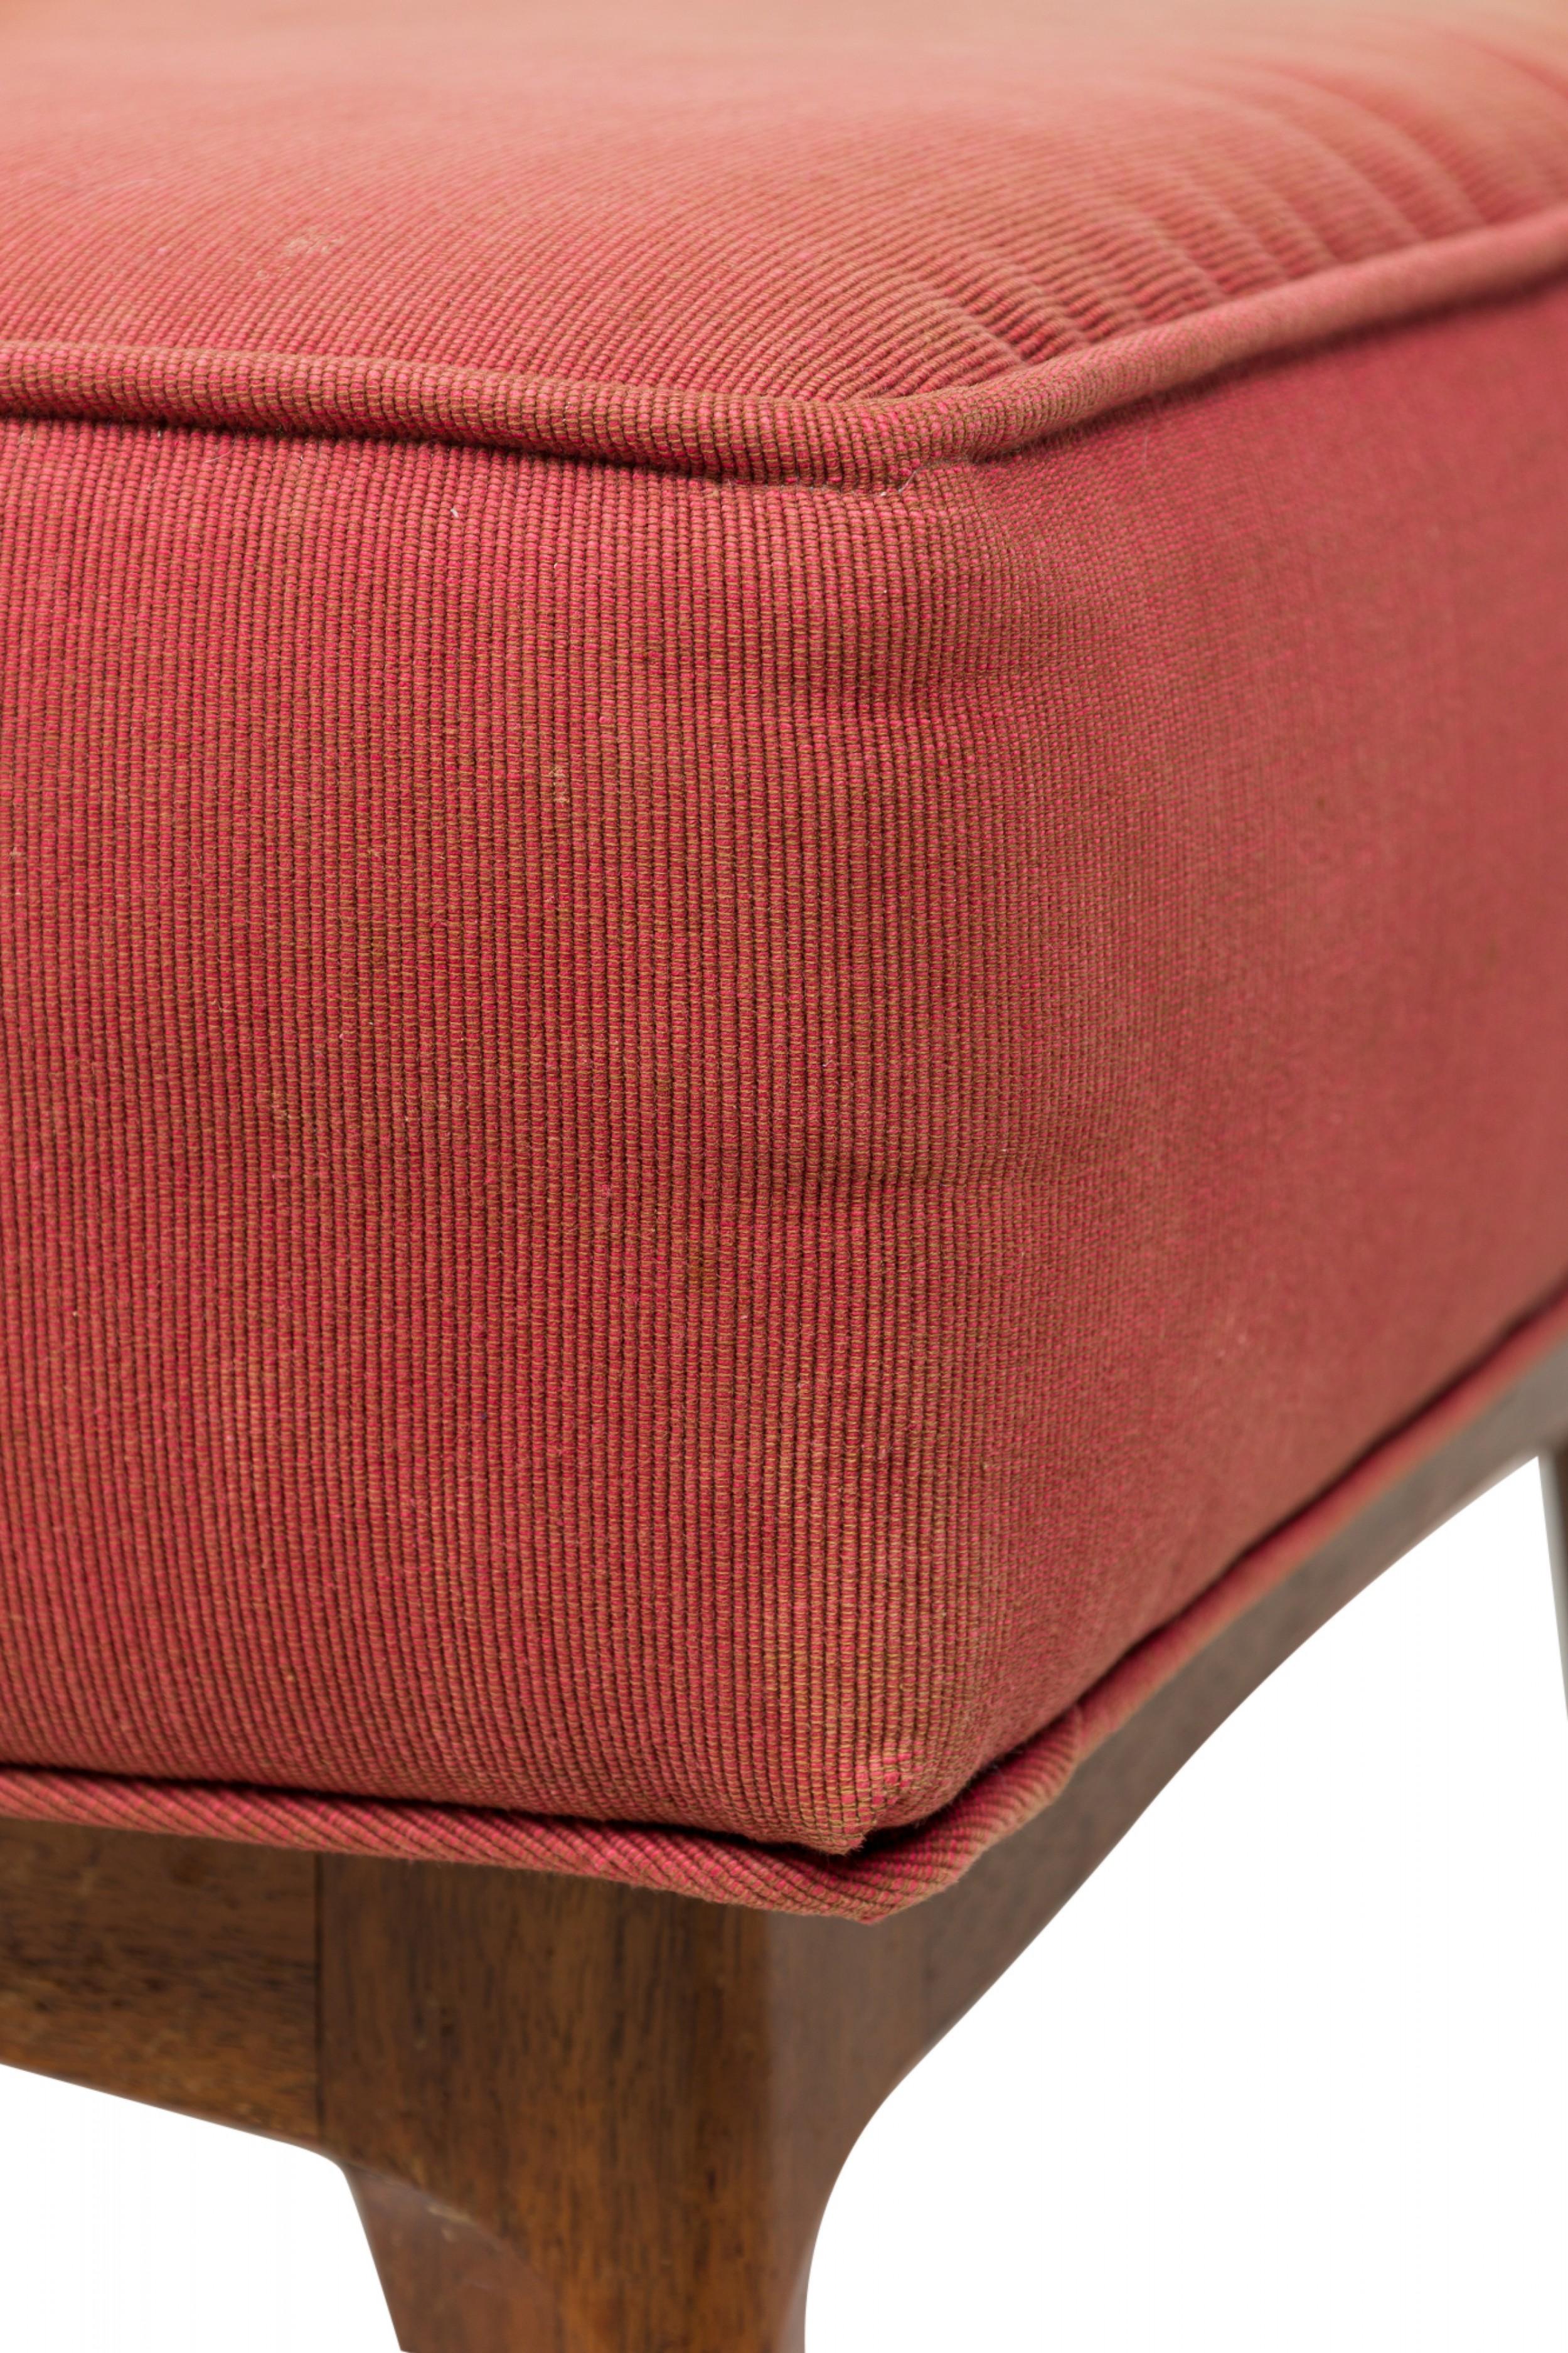 Midcentury Italian Walnut Red Upholstered Ottoman For Sale 2